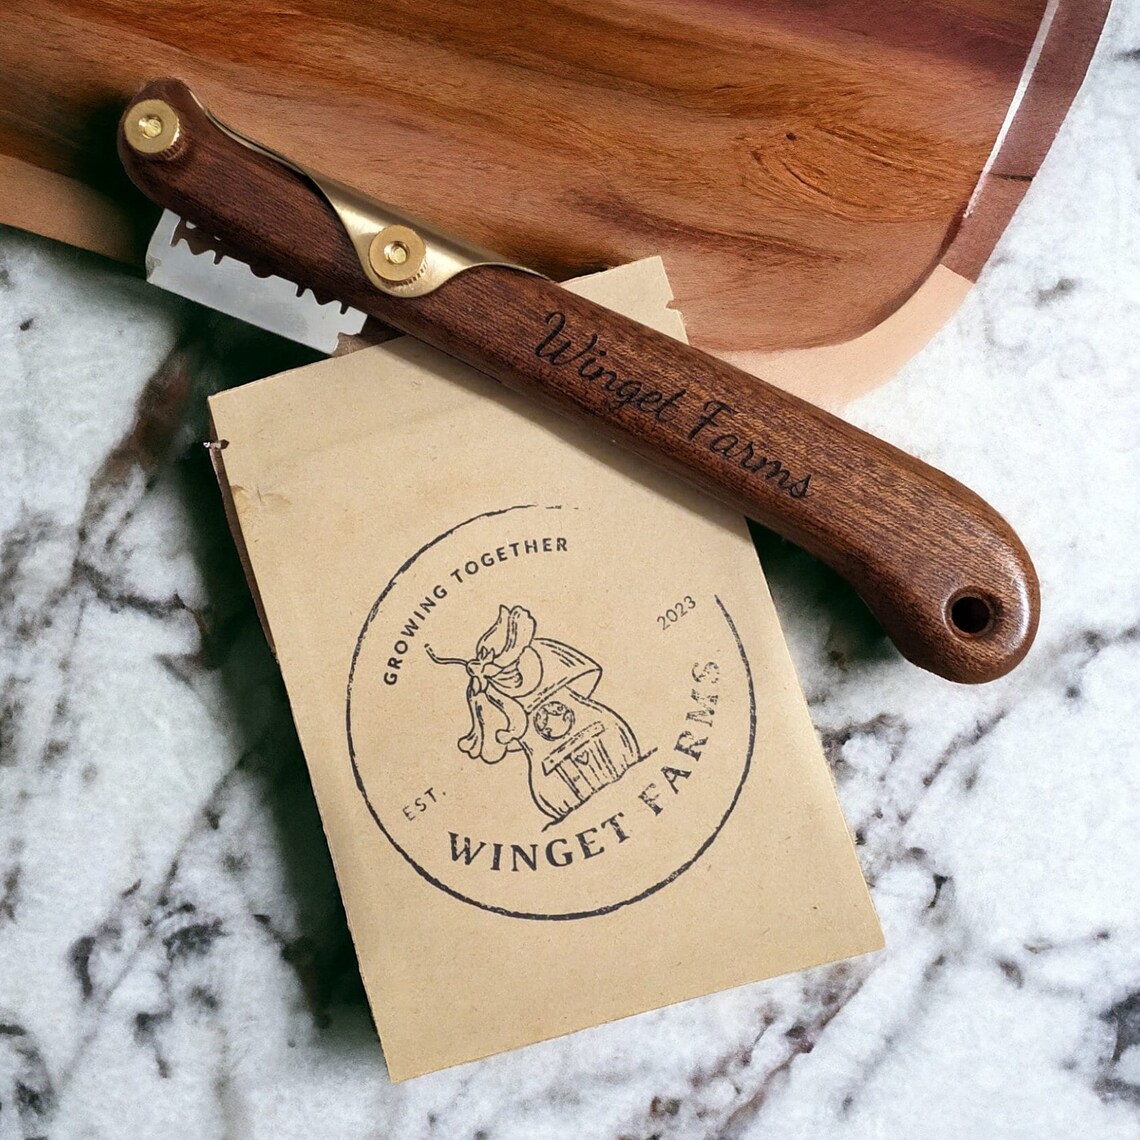 Baker's Traditional Bread Lame - Winget Farms Engraved Bread Scoring Tool  for Artisan sourdough and breads baked goods - Gifts for Baker